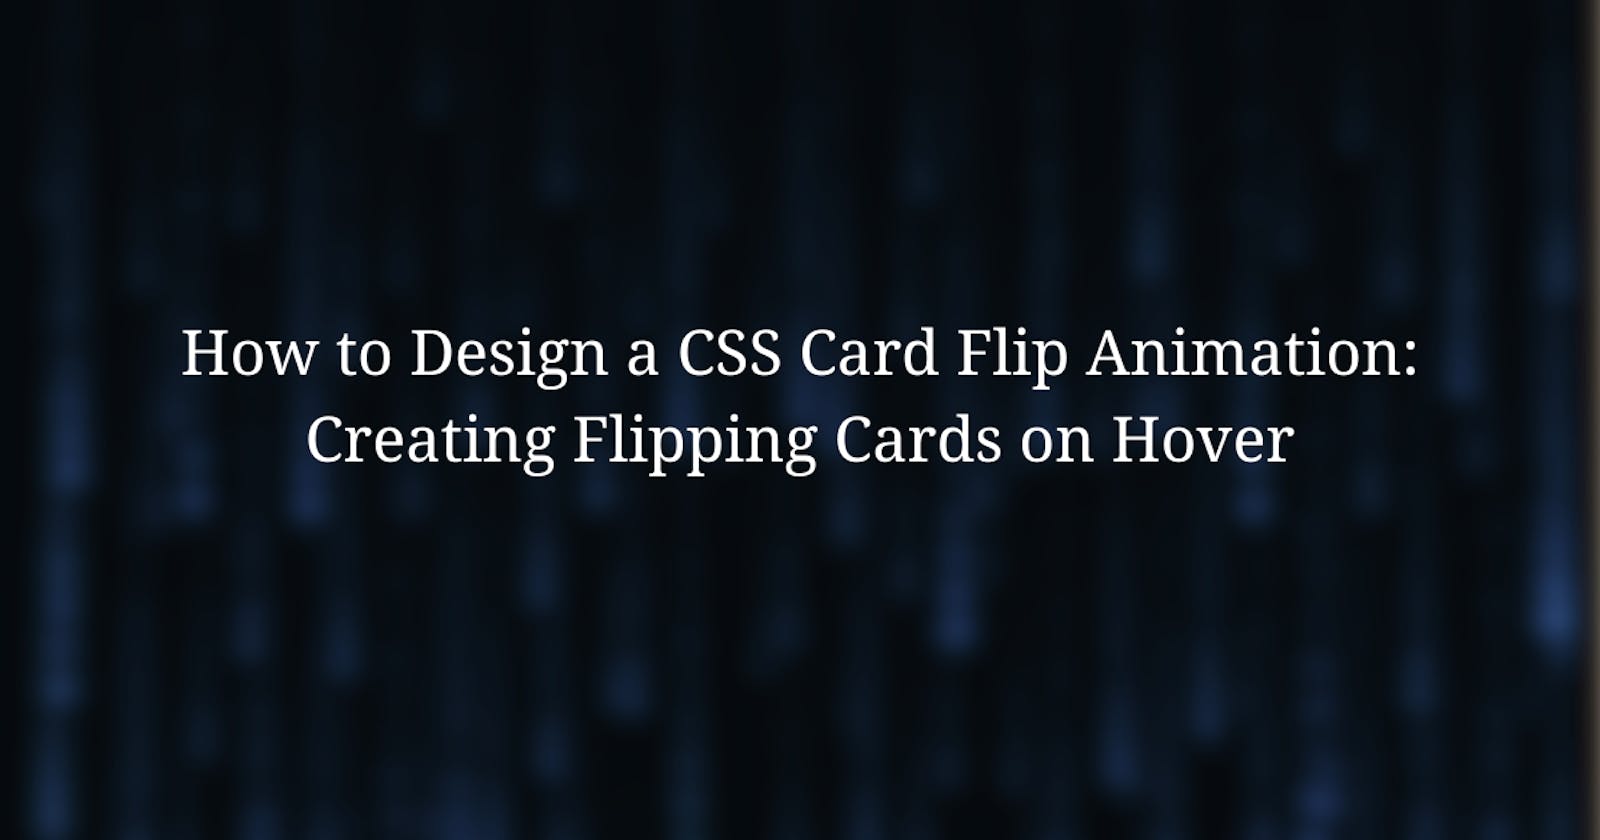 How to Design a CSS Card Flip Animation: Creating Flipping Cards on Hover